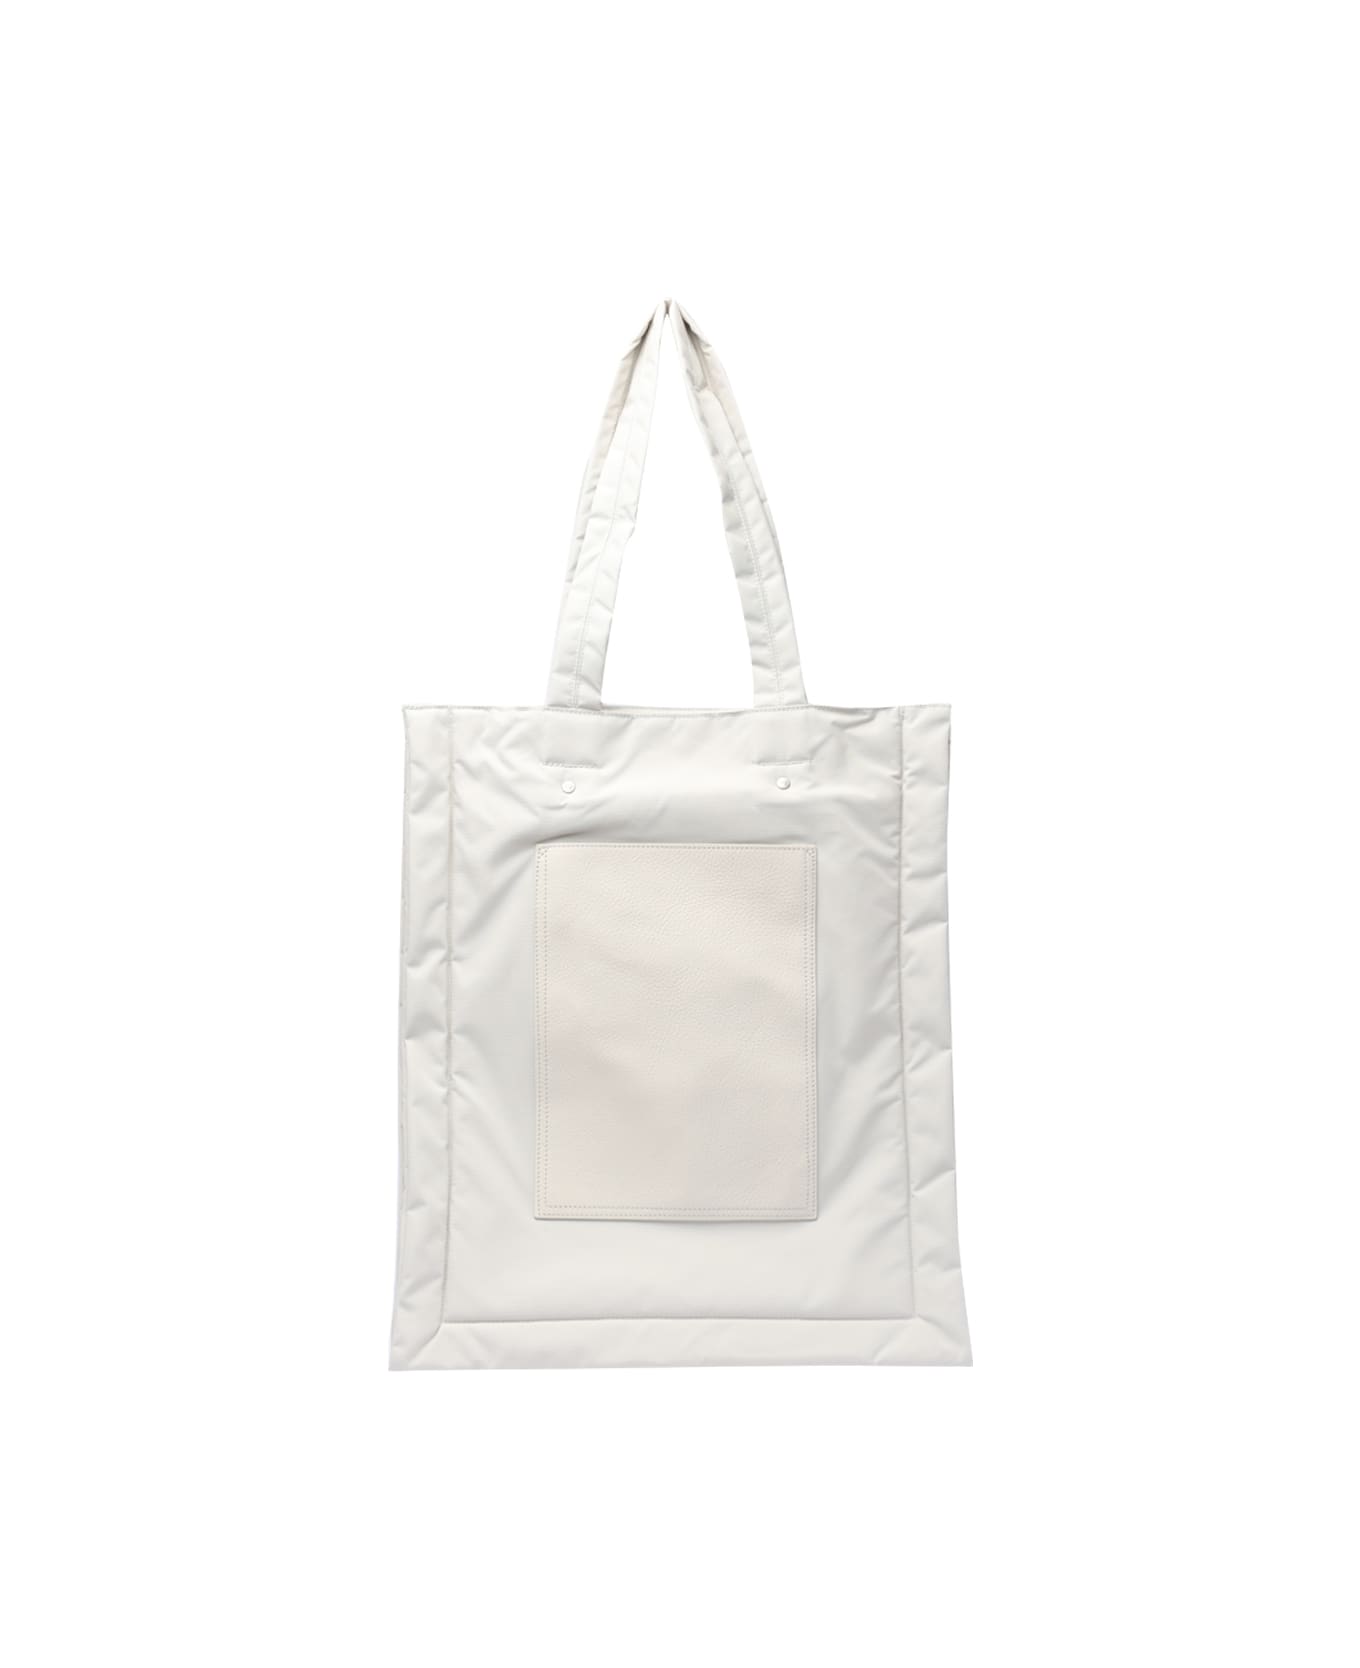 Y-3 Lux Tote Bag トートバッグ